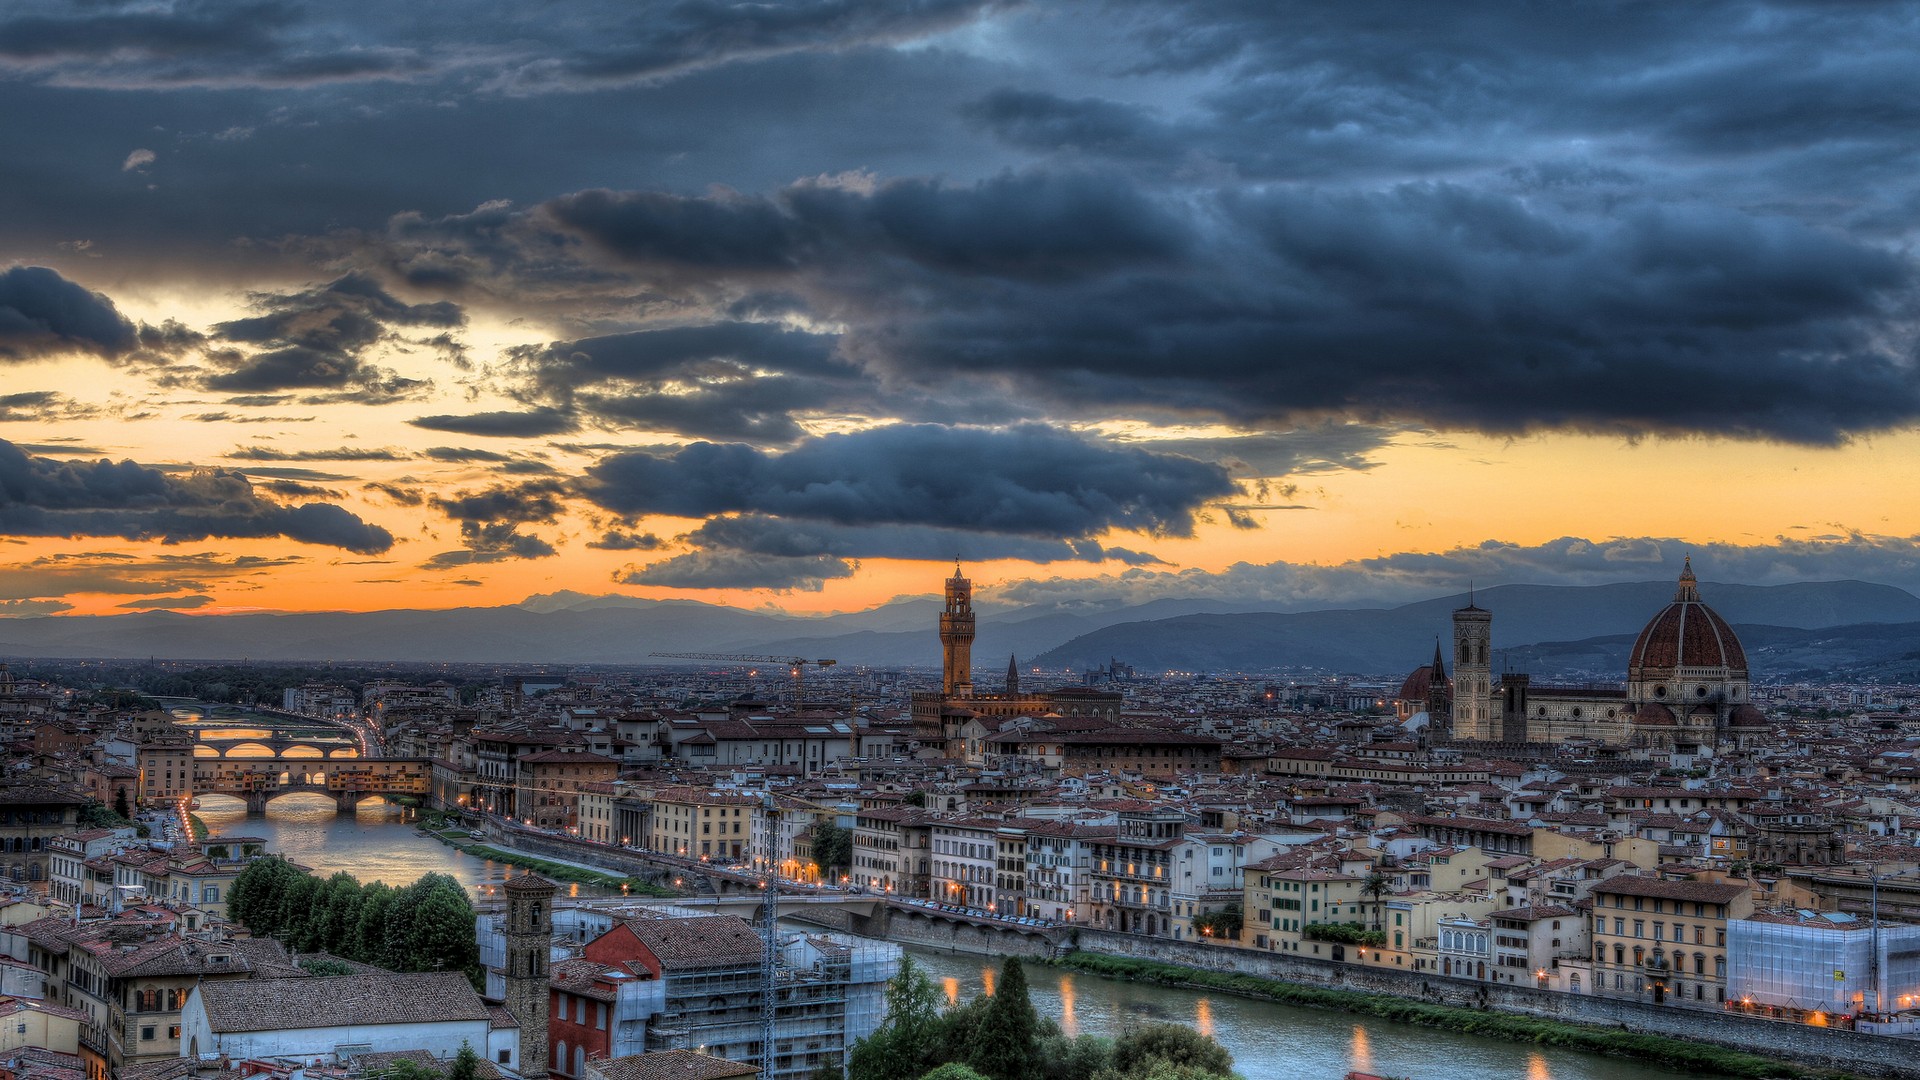 General 1920x1080 Florence Italy city cityscape architecture gothic architecture river sunset clouds